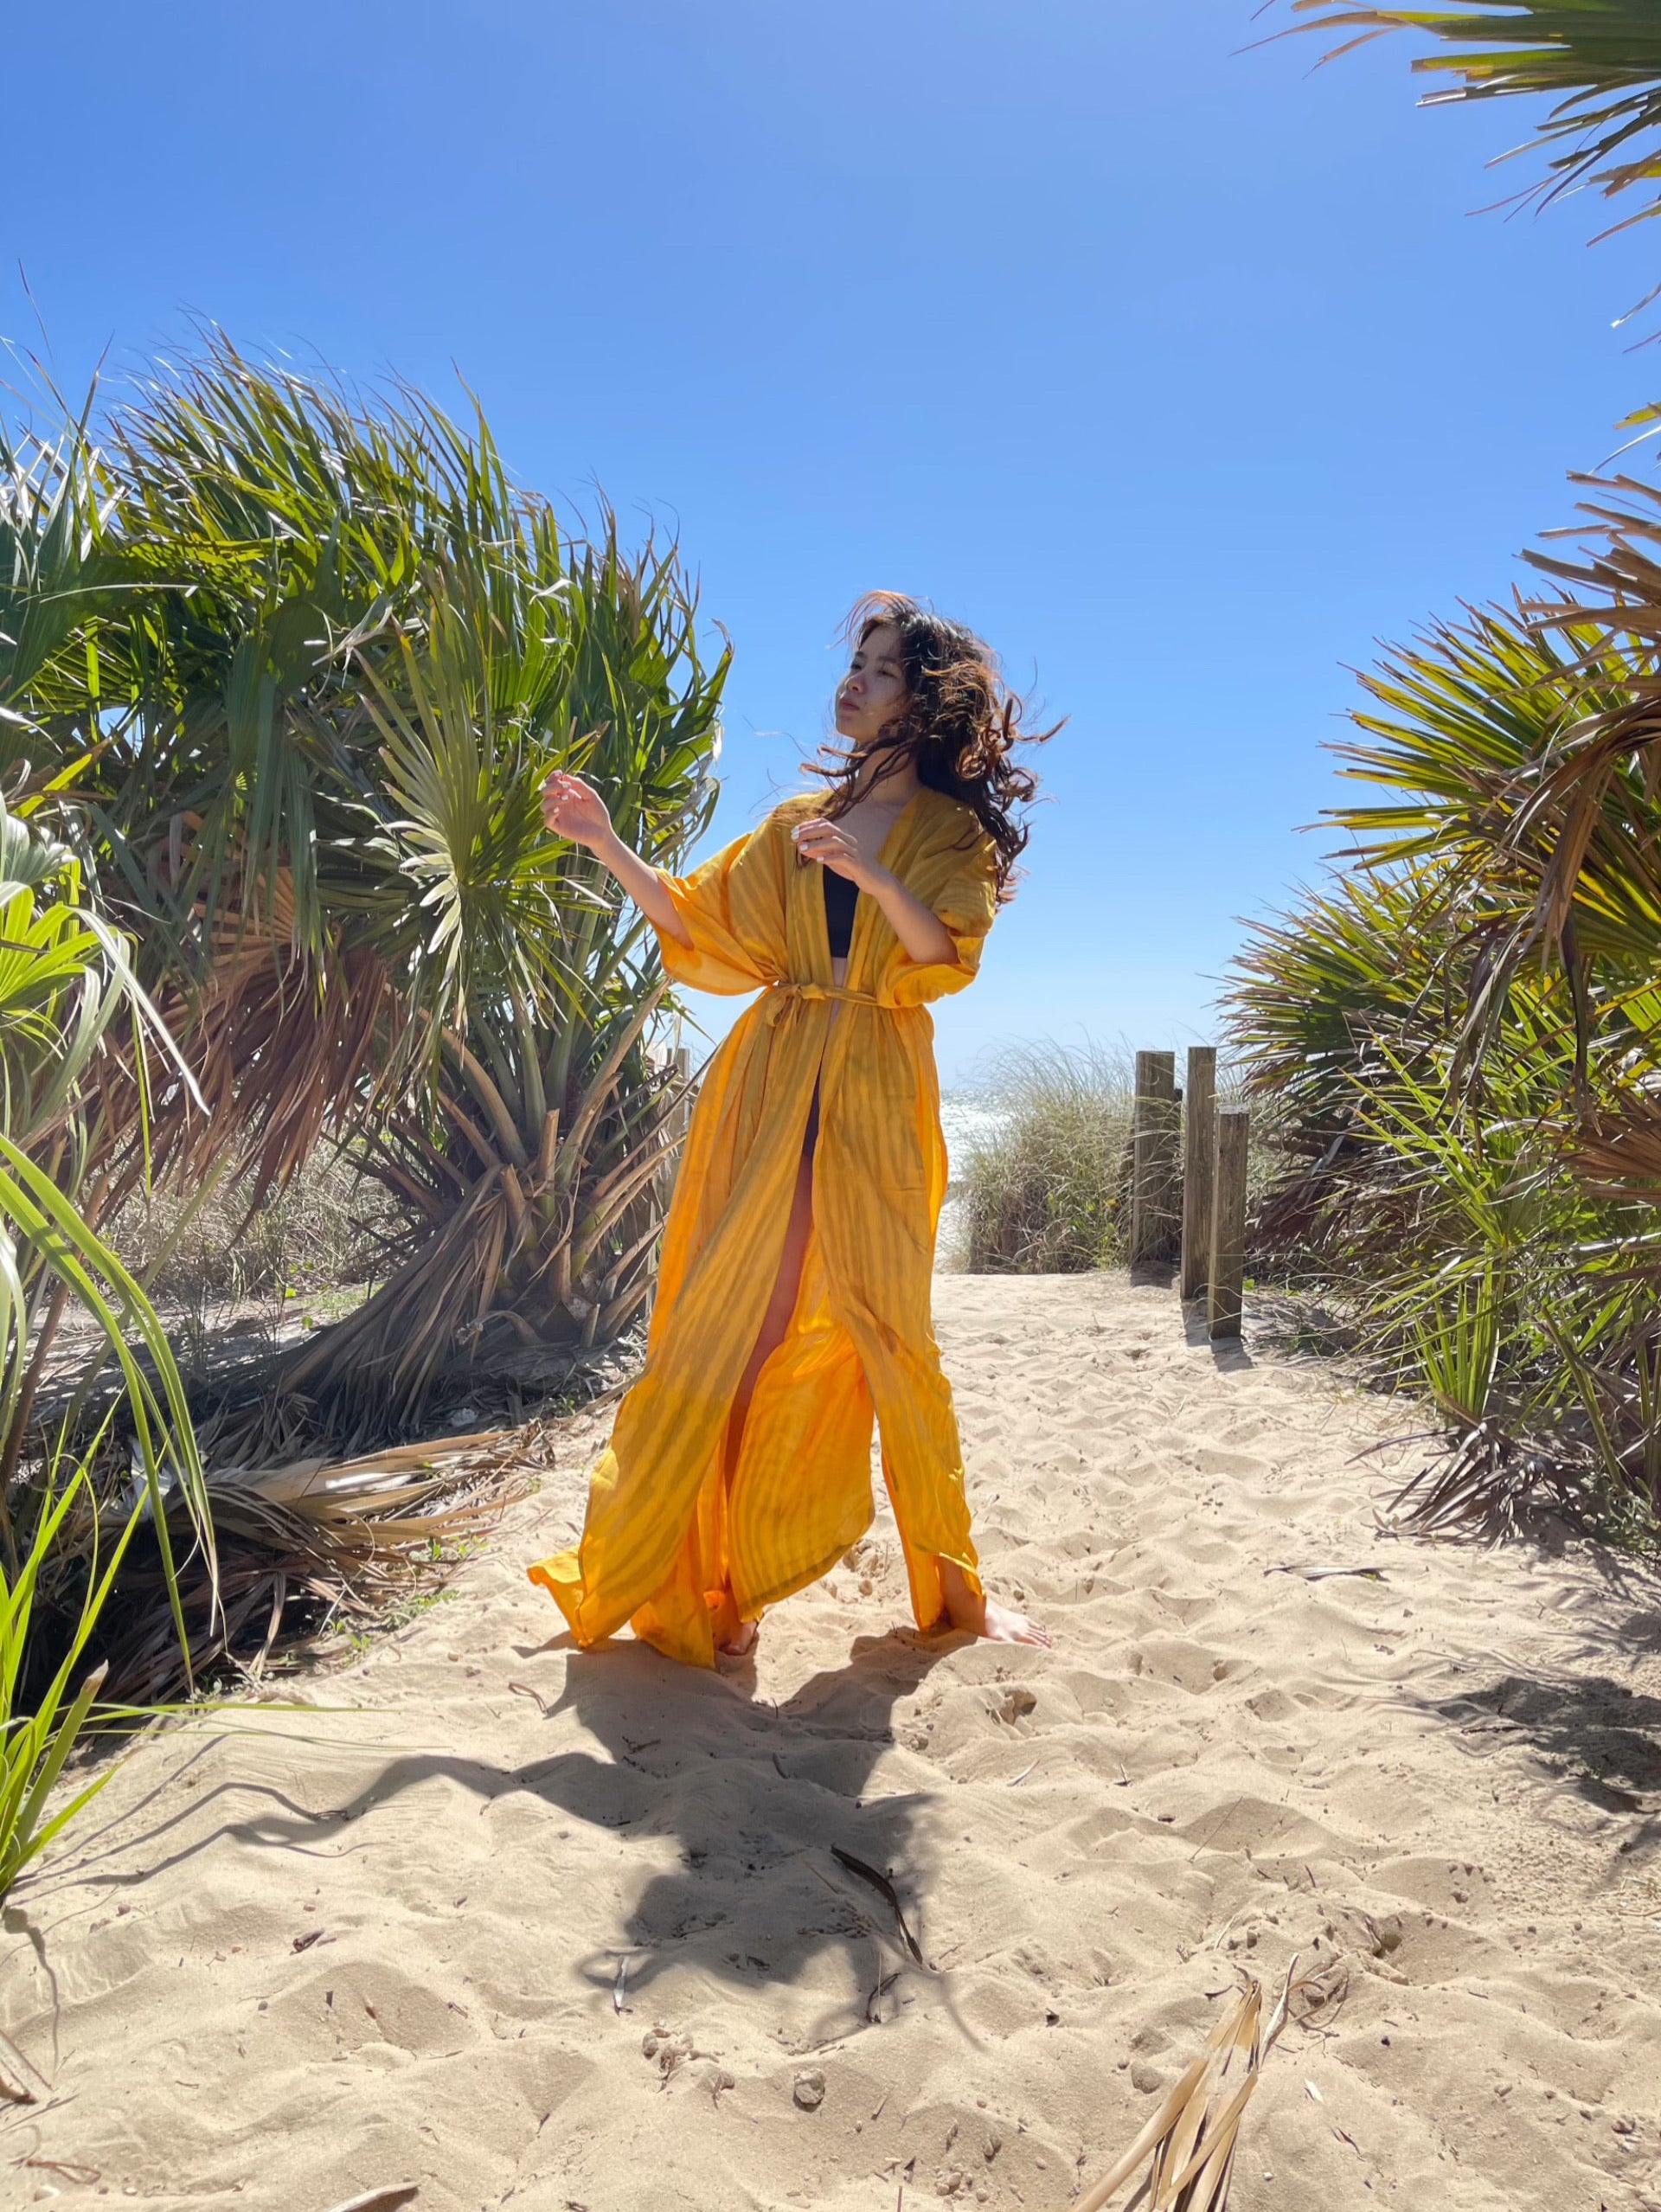 A beautiful unisex kimono, the Moon Tie Dye Kaftan Kimono is handcrafted from 100% soft rayon and features side slits at the hemline and inner loops between wings complemented by breezy sleeves, a basic for remaining cool as temperatures soar. Slip the chic kimono robe over a bikini